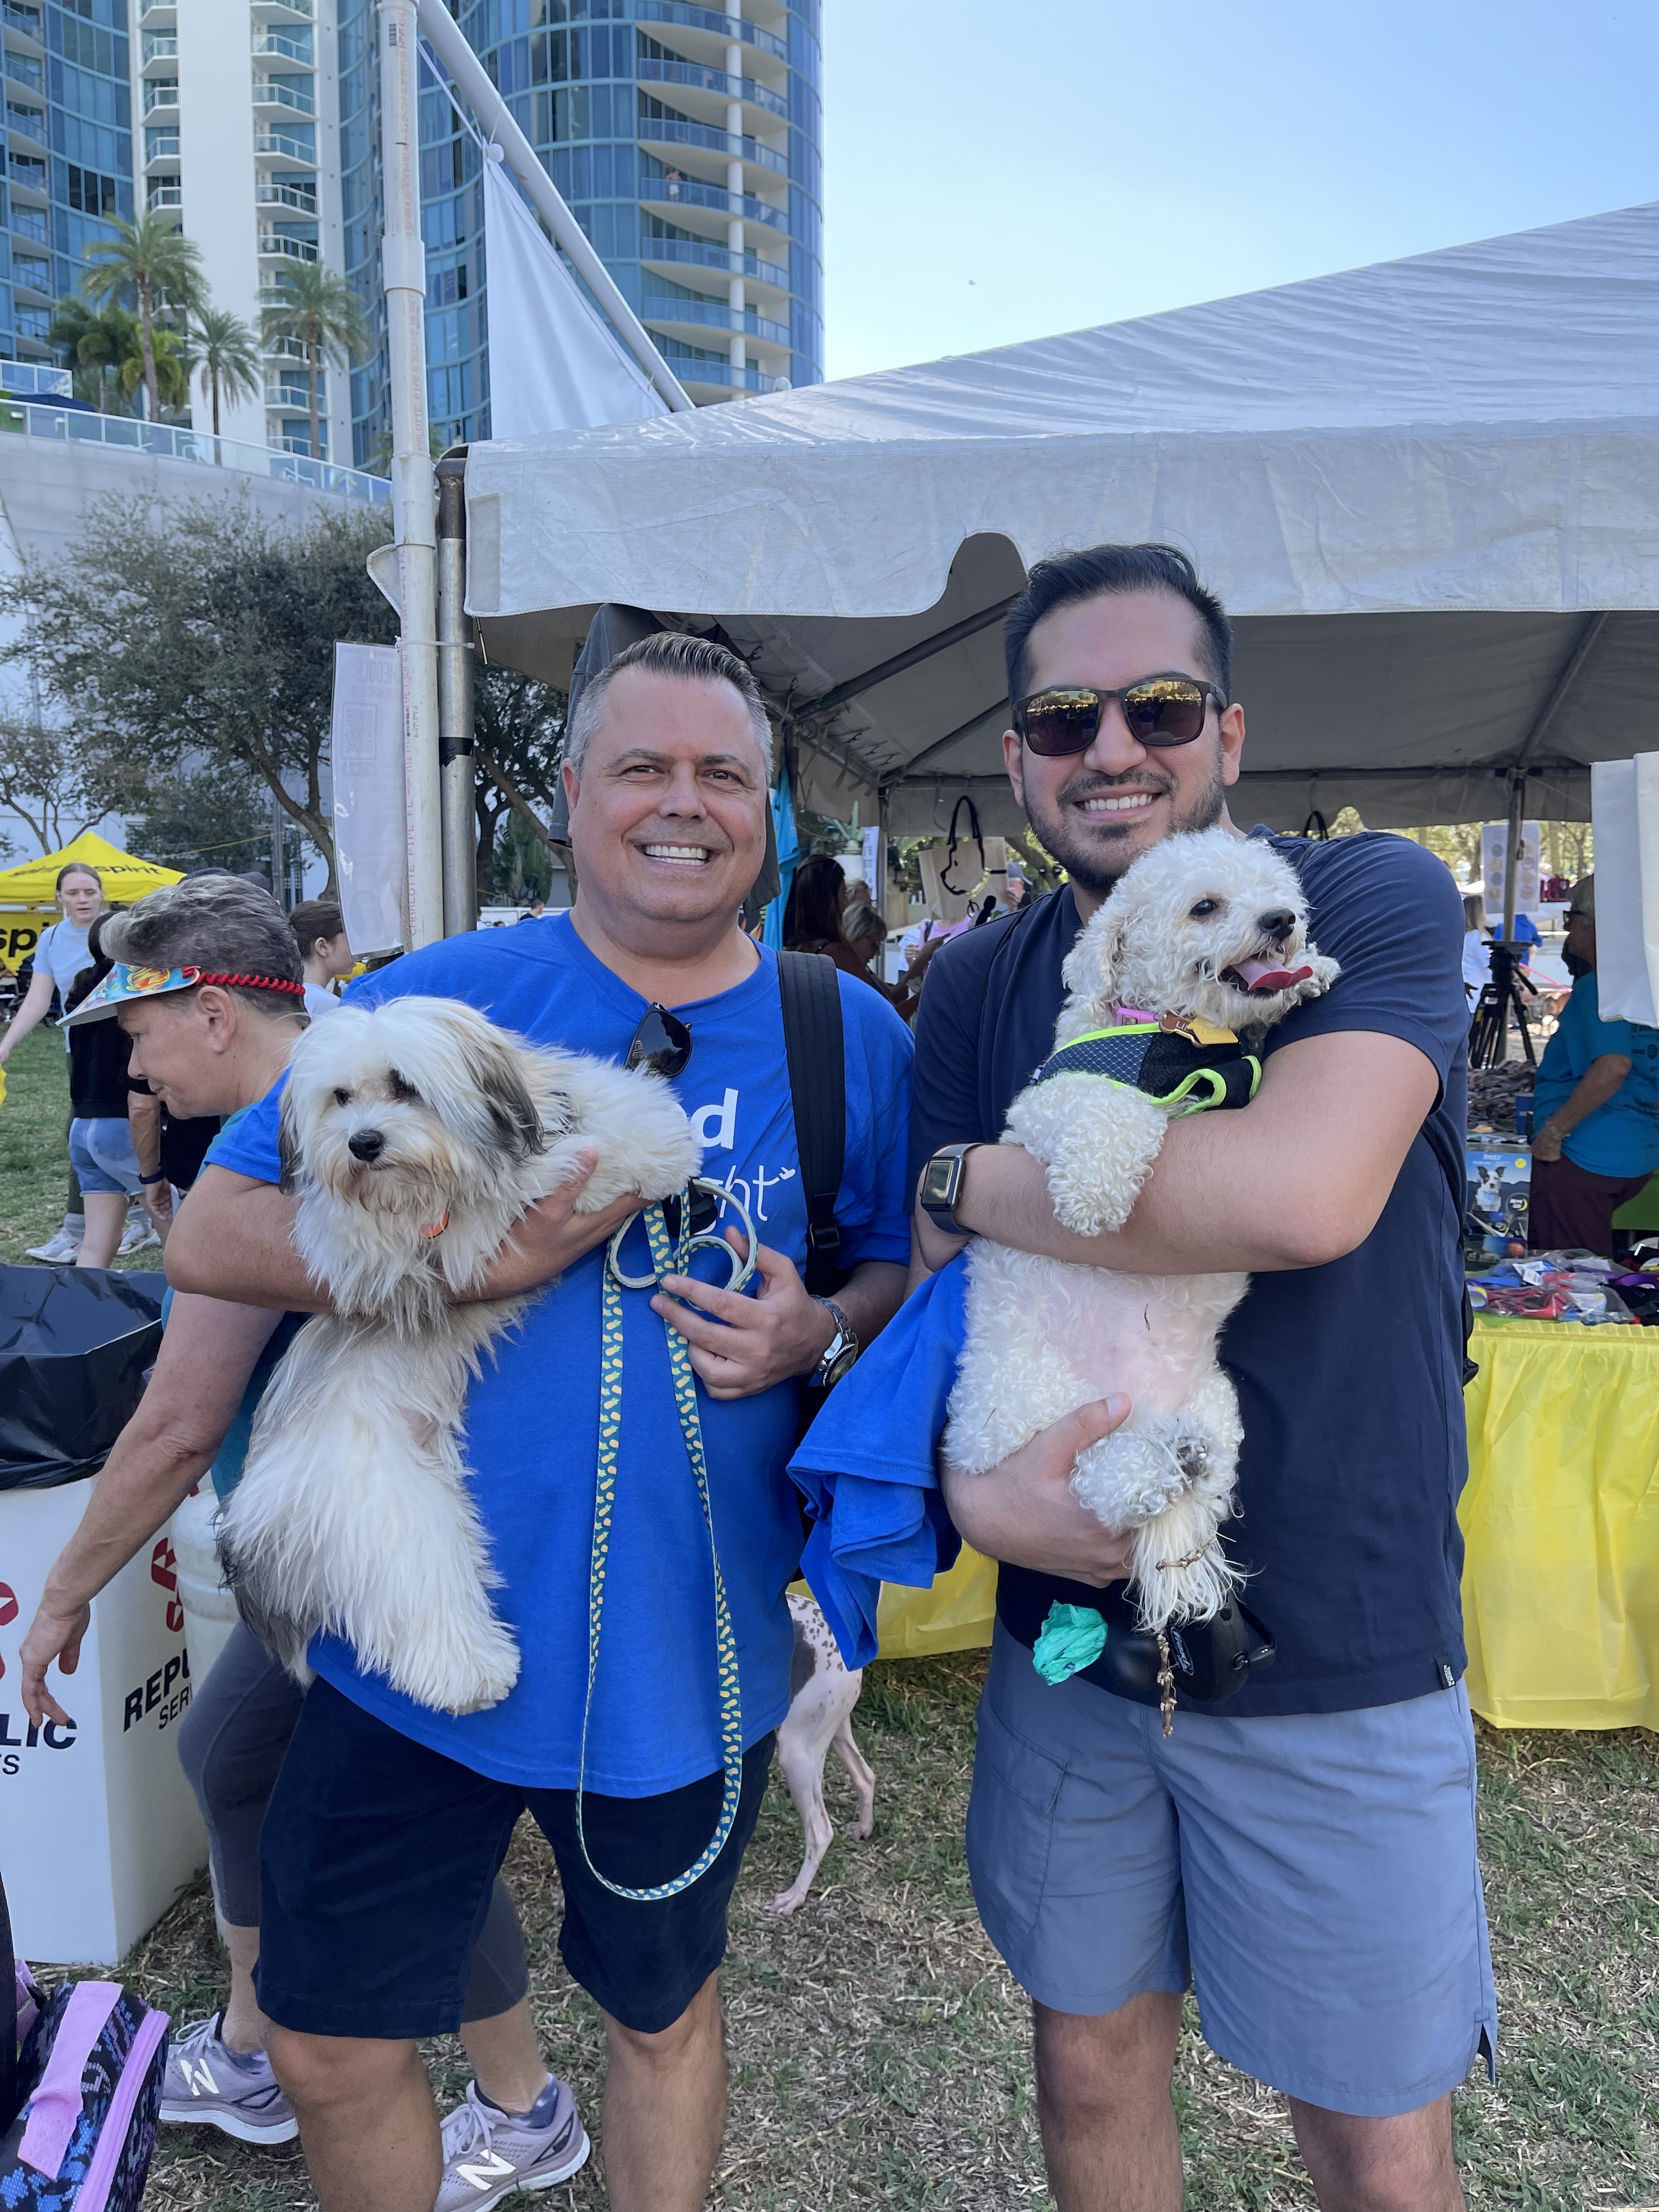 Bobby and Luis - Team Leaders in the 2022 Walk for the Animals